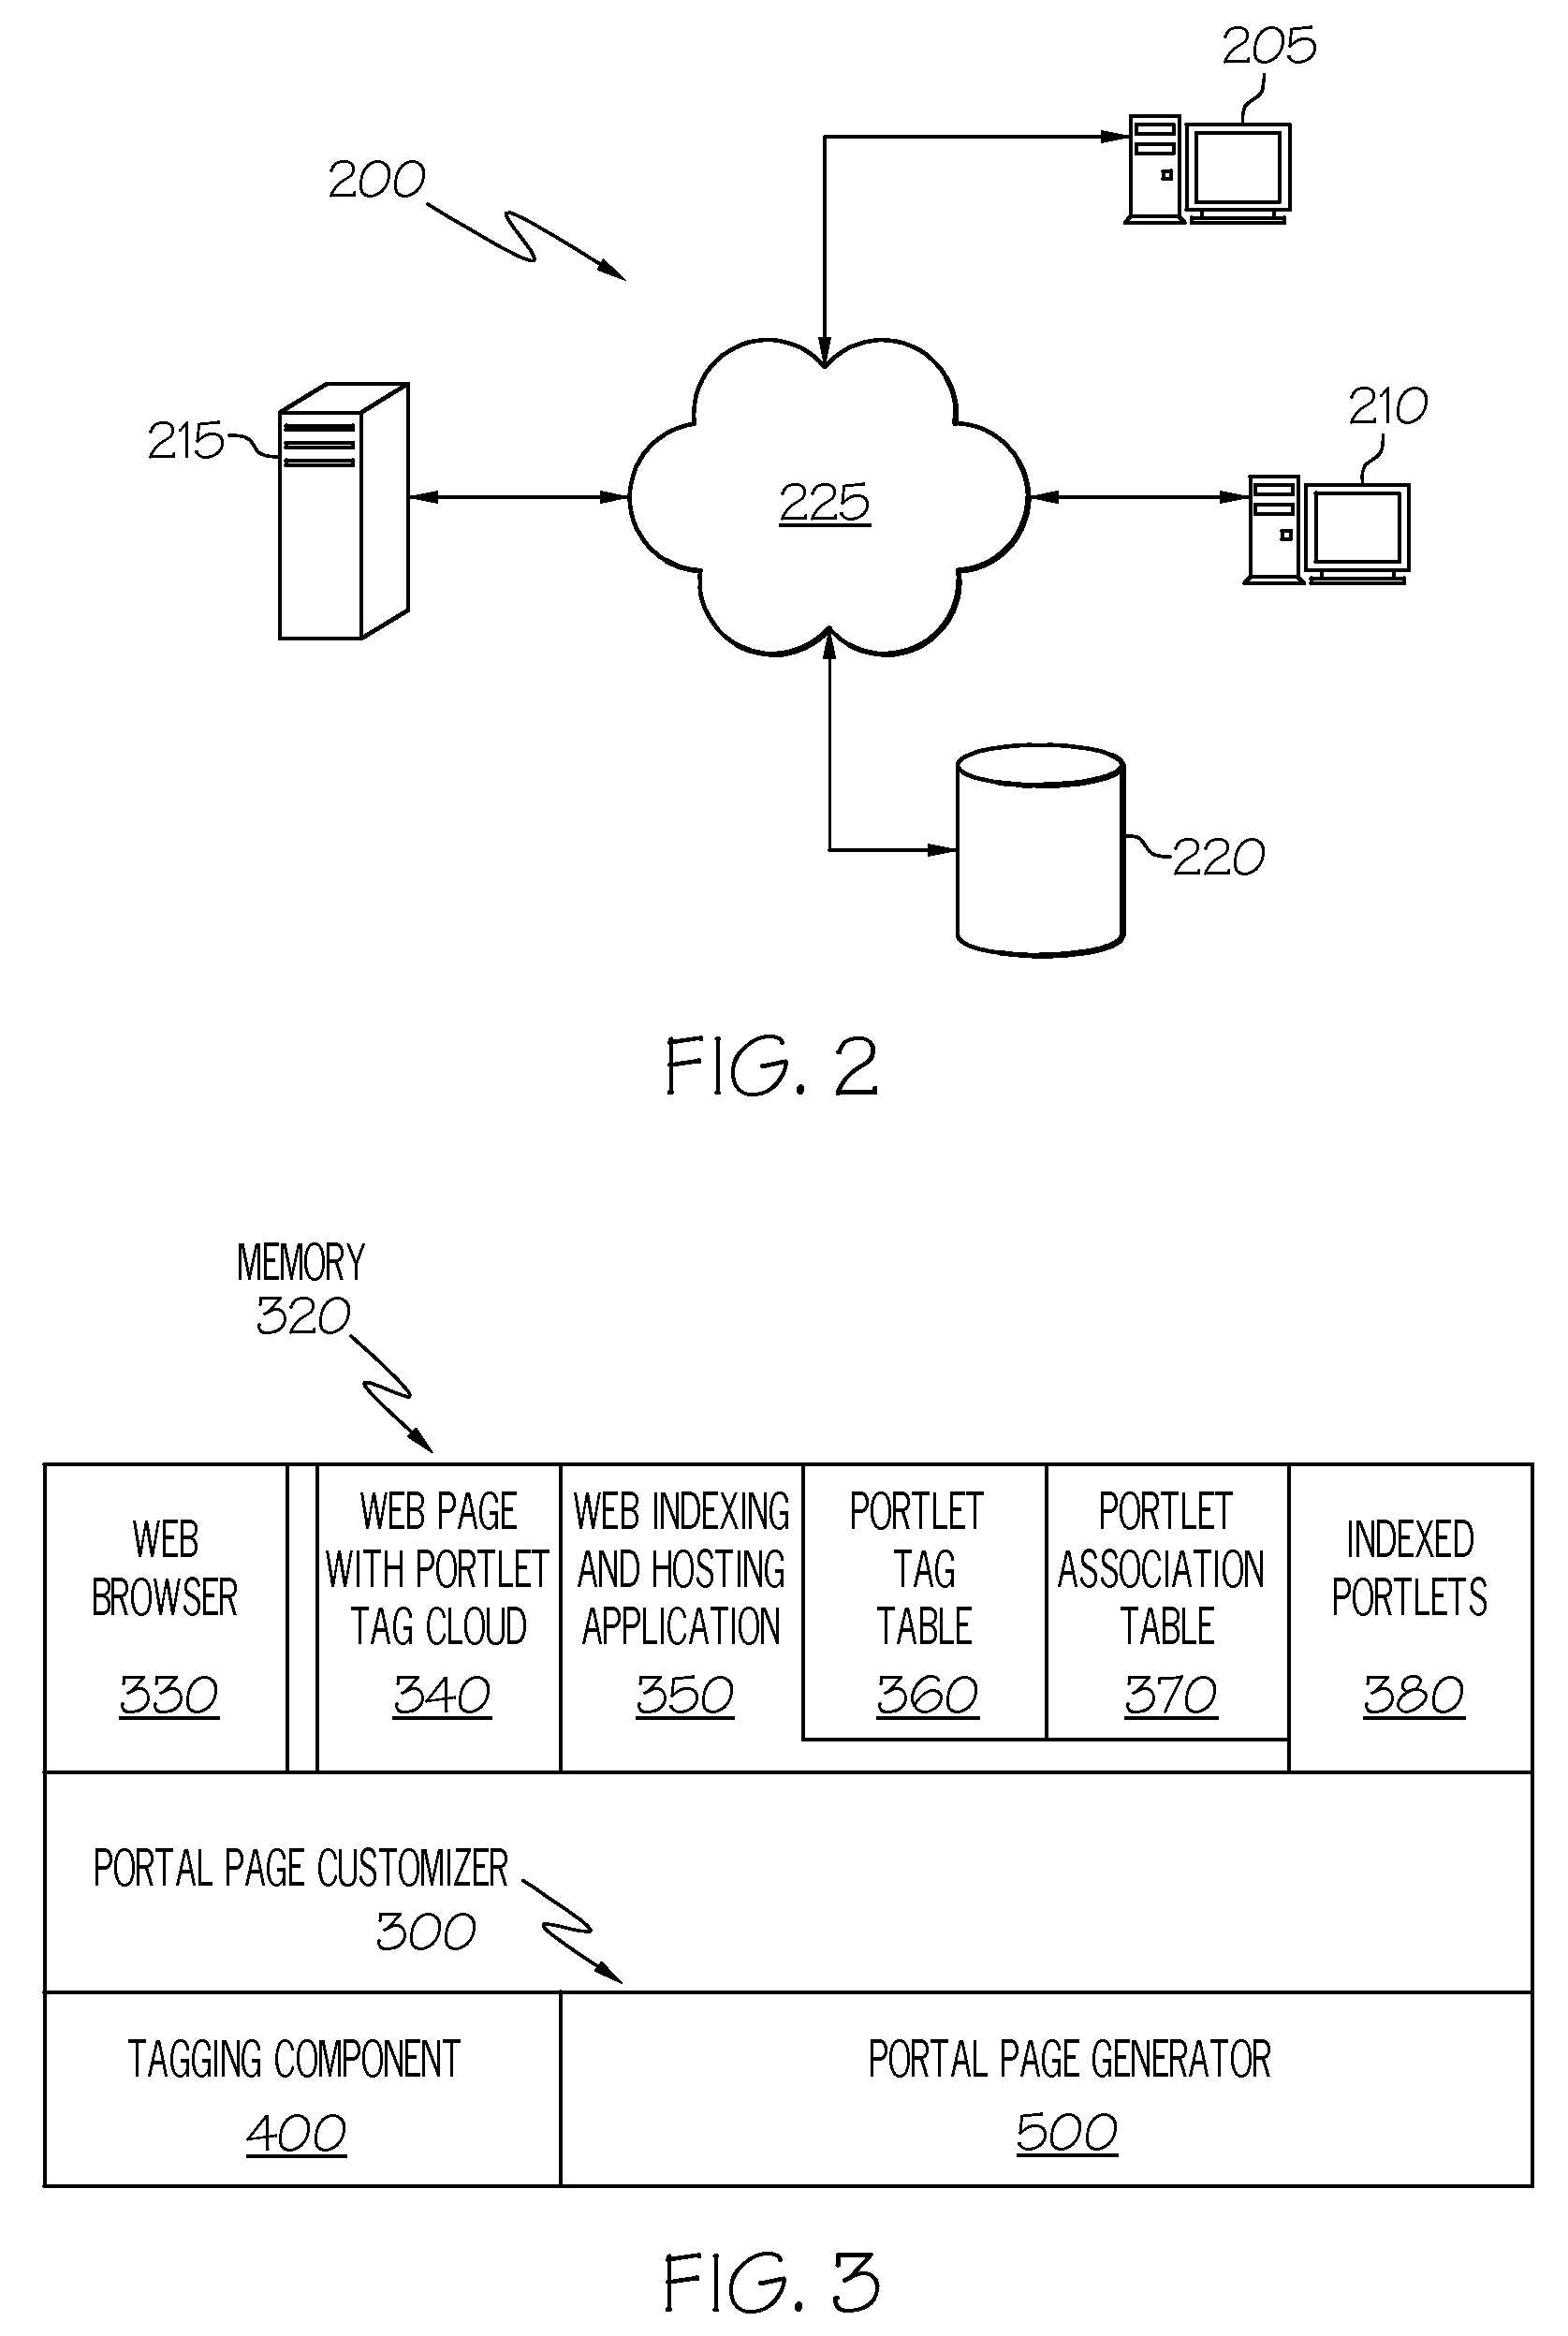 Method and Apparatus for Deploying Portlets in Portal Pages Based on Social Networking